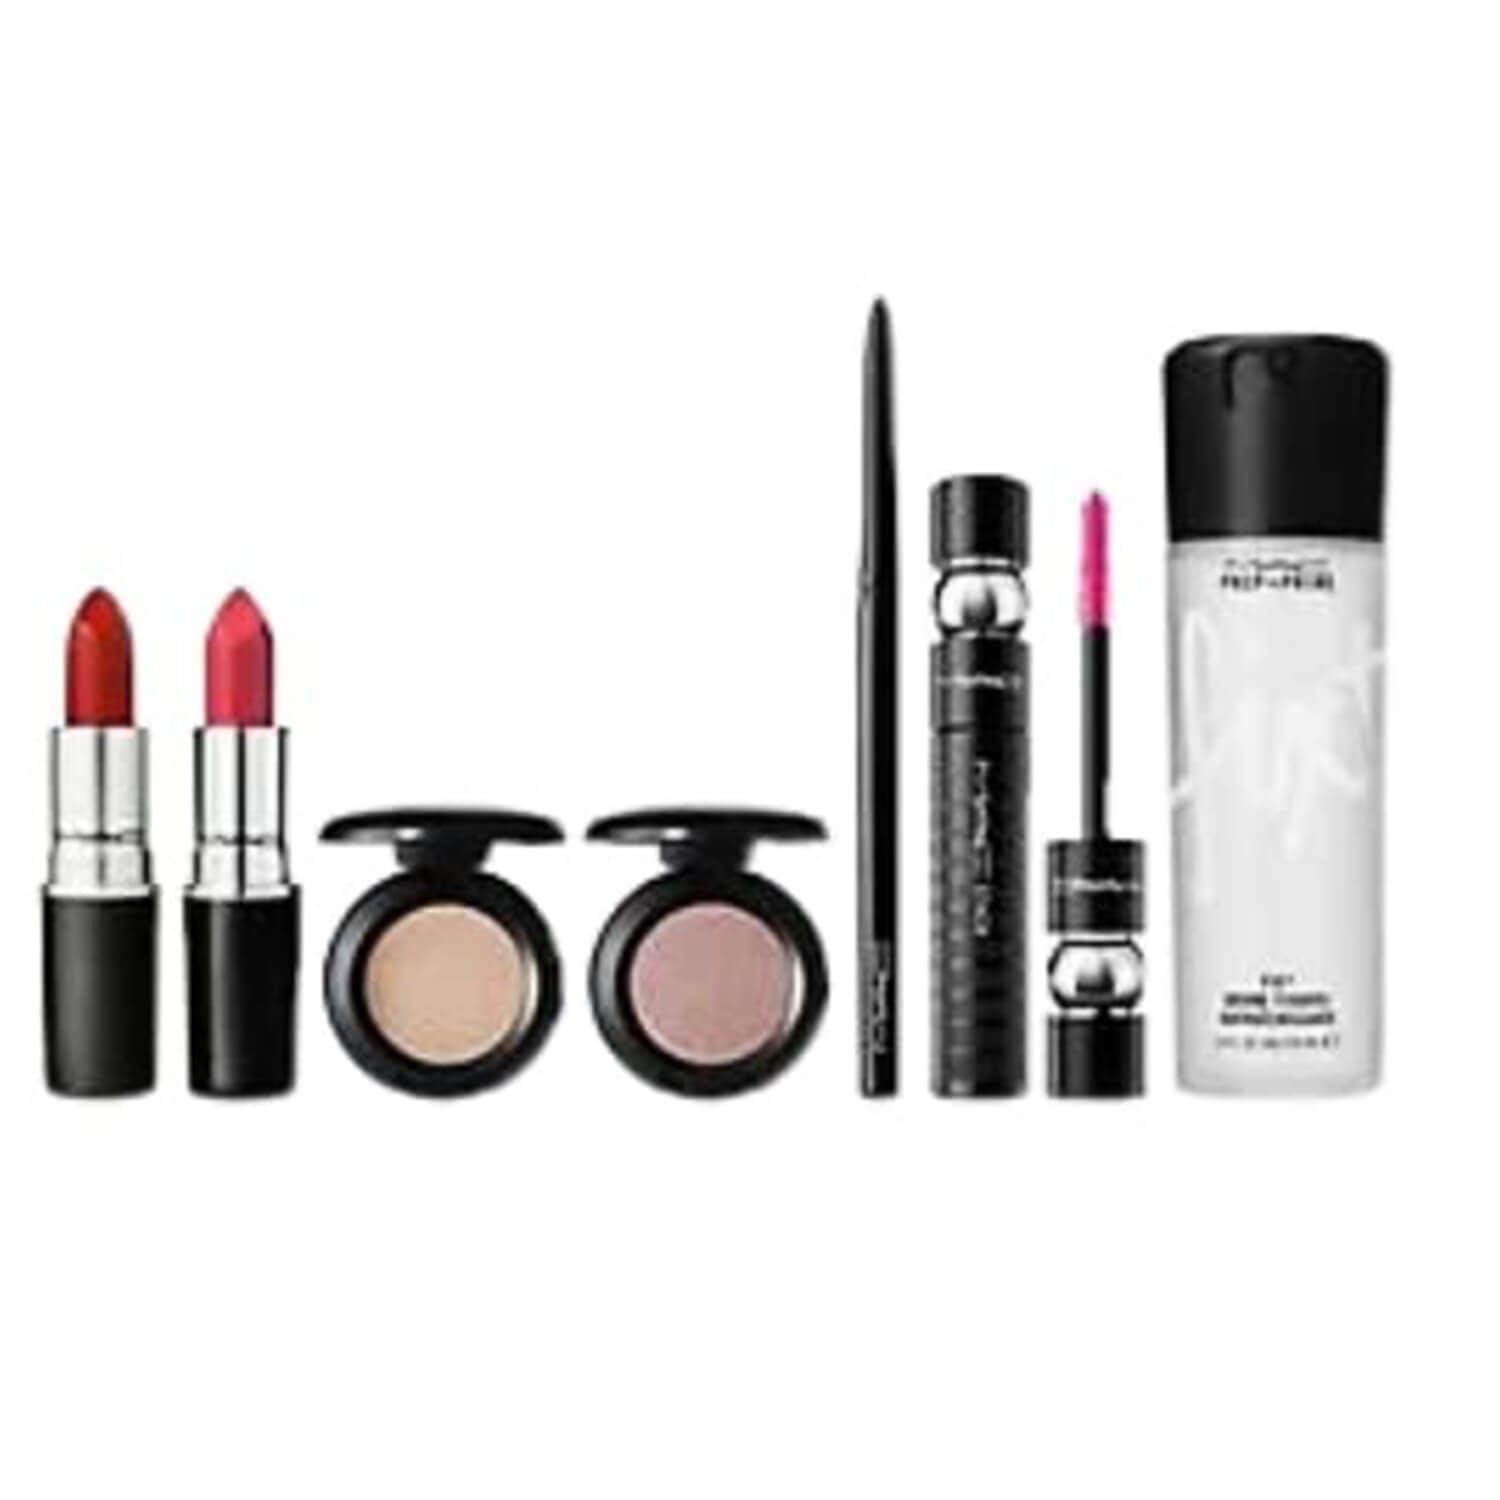 image showing products inside MAC Cosmetics Makeup Bestsellers Gift Set for her available at Heygirl.pk for delivery in Pakistan.